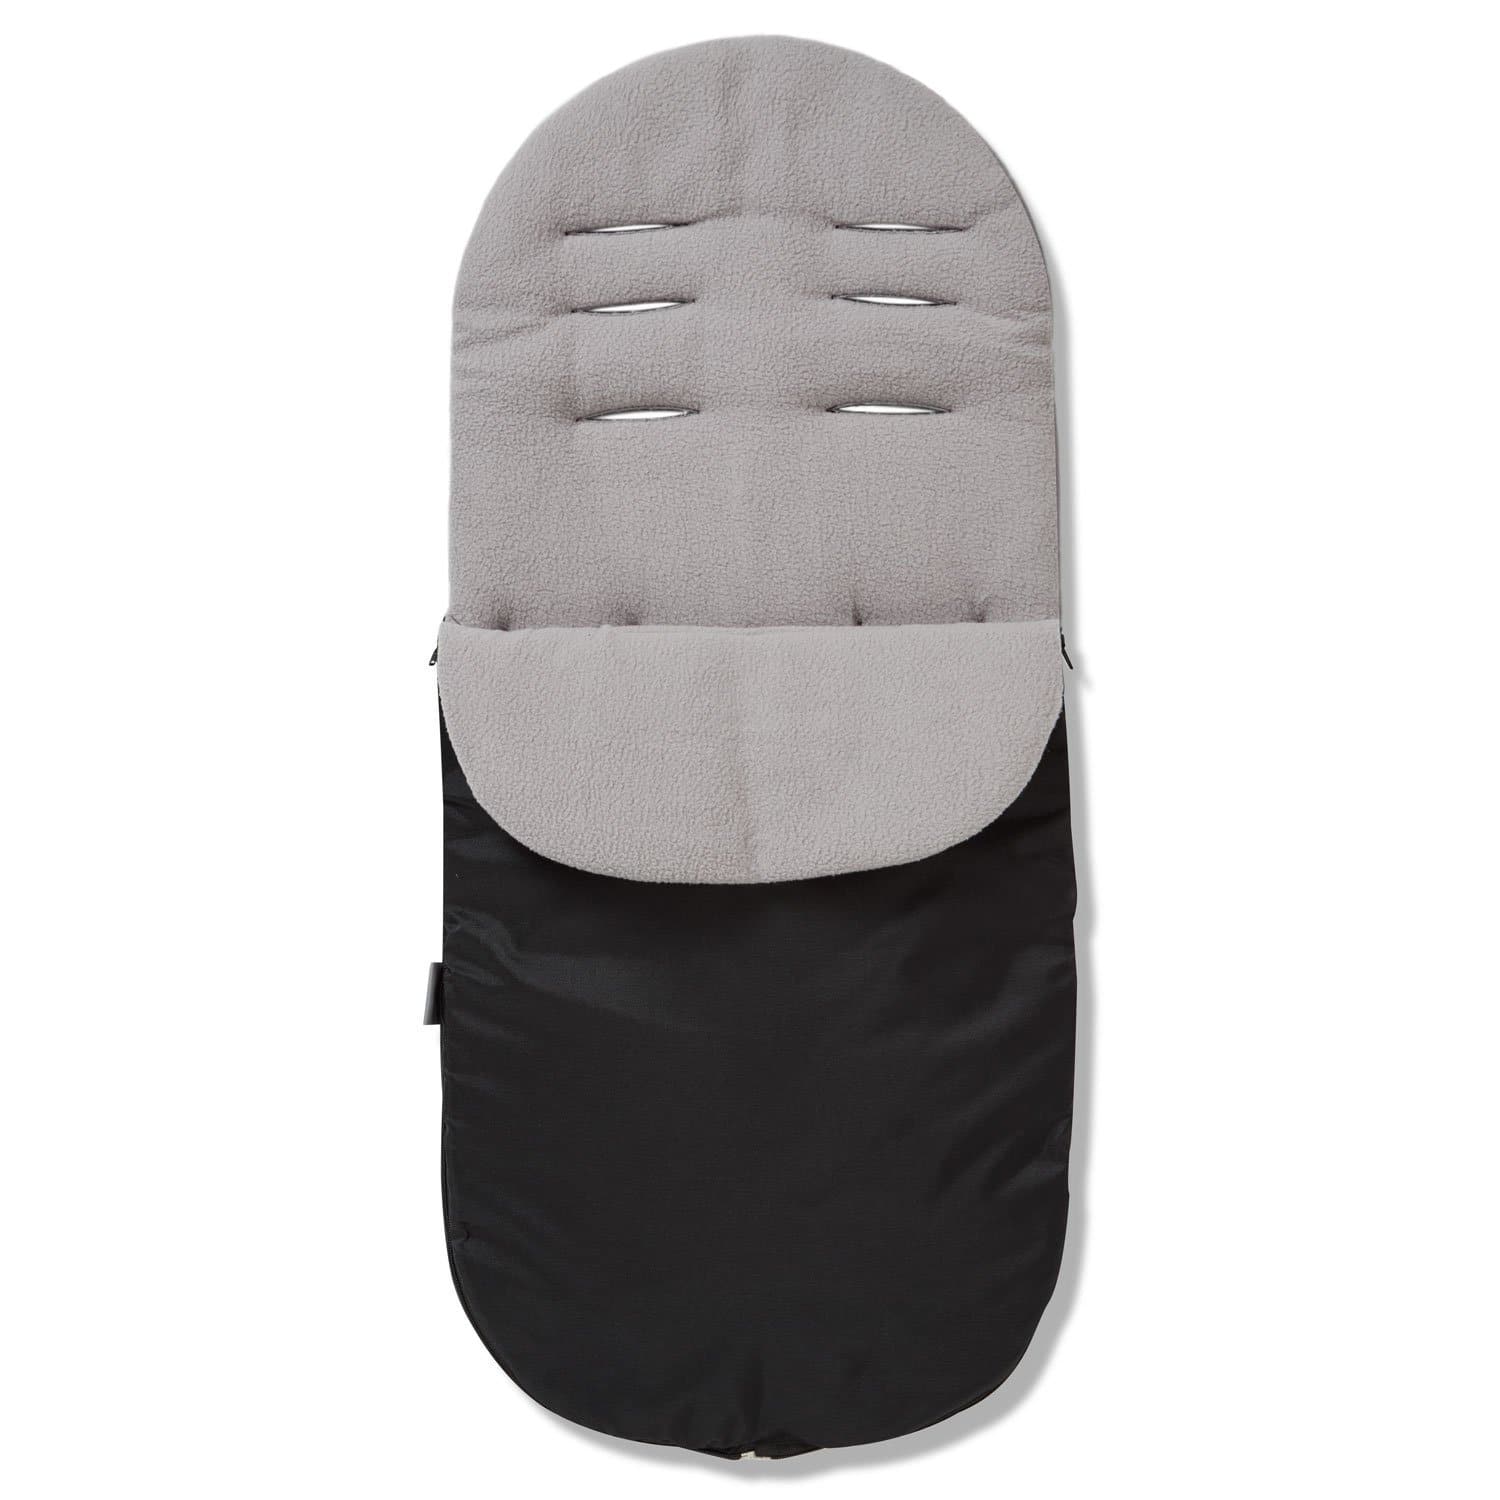 Footmuff / Cosy Toes Compatible with Baby Weavers - Grey / Fits All Models | For Your Little One